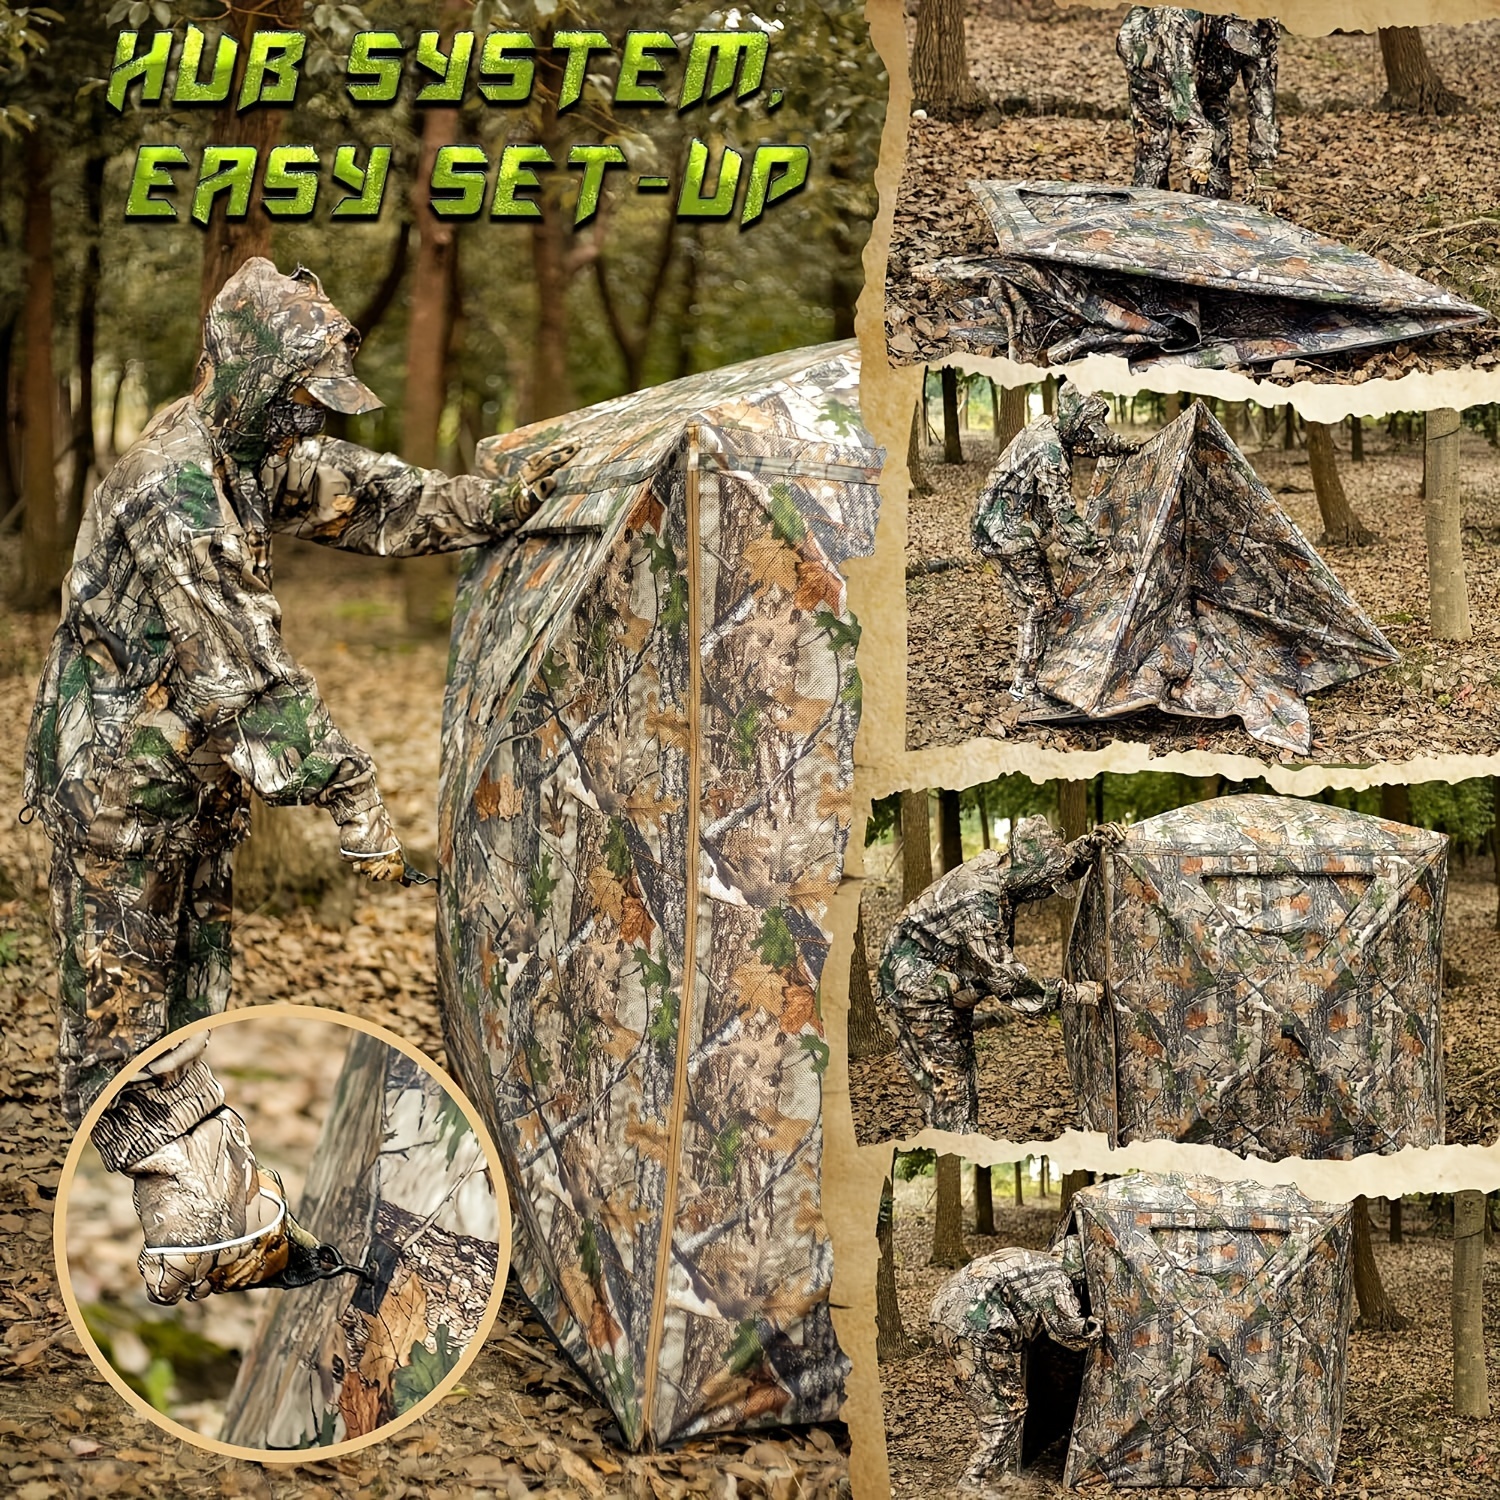 Portable 2-3 Person 270 Degree See Through Hunting Blind Ground Camouflage  Pop Up Hub Turkey Deer Blinds Tent